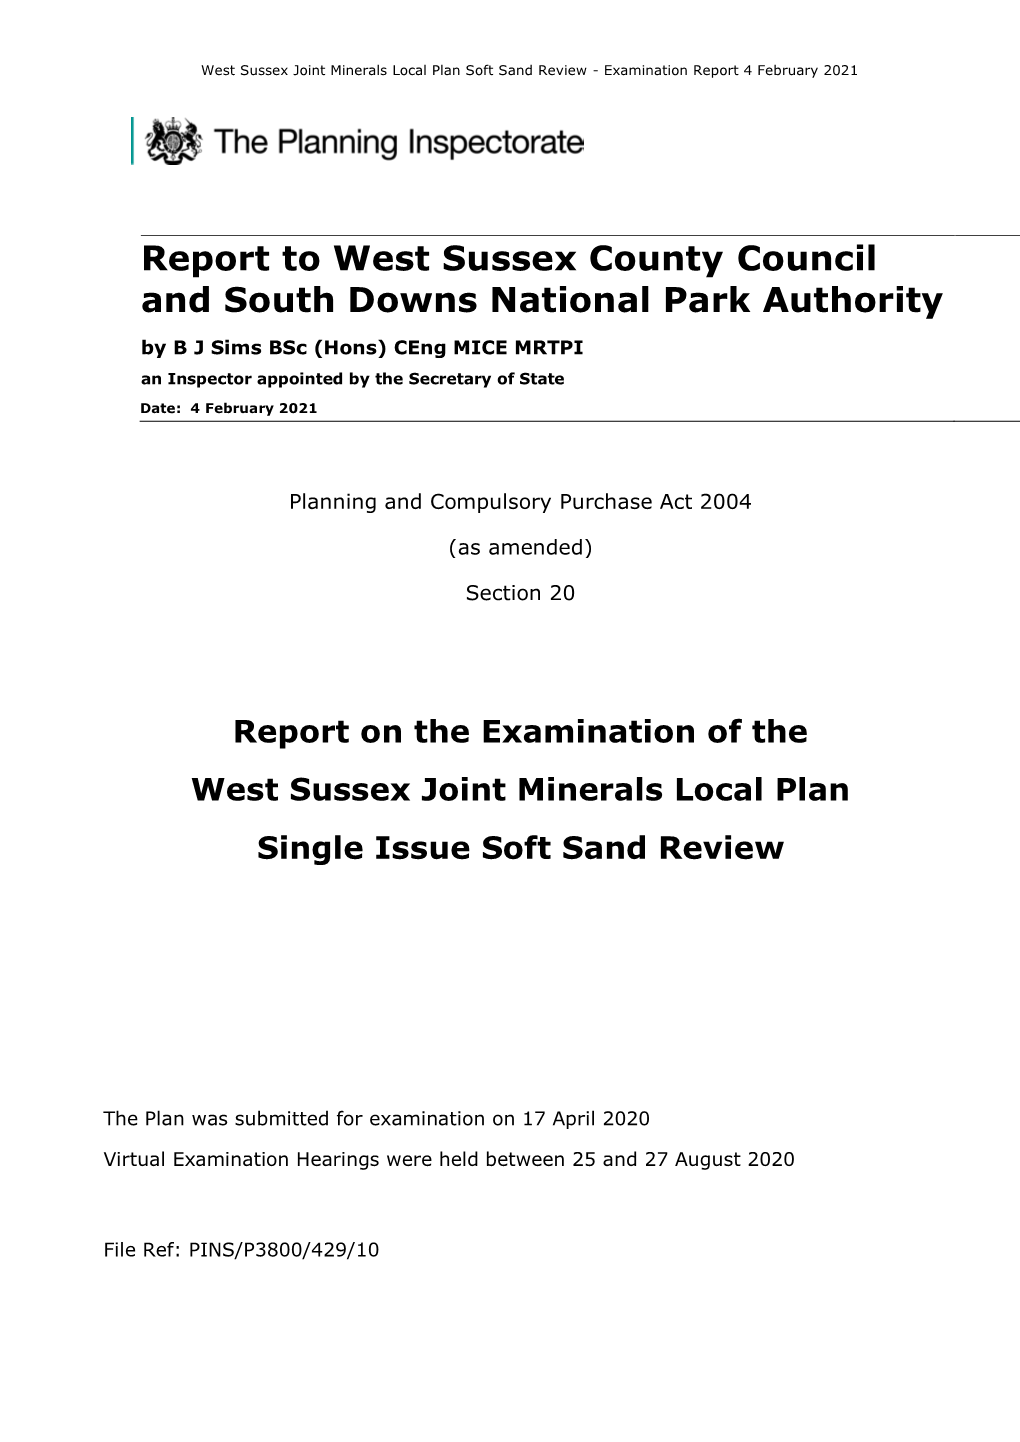 Inspector's Report on the Joint Minerals Local Plan Single Issue Soft Sand